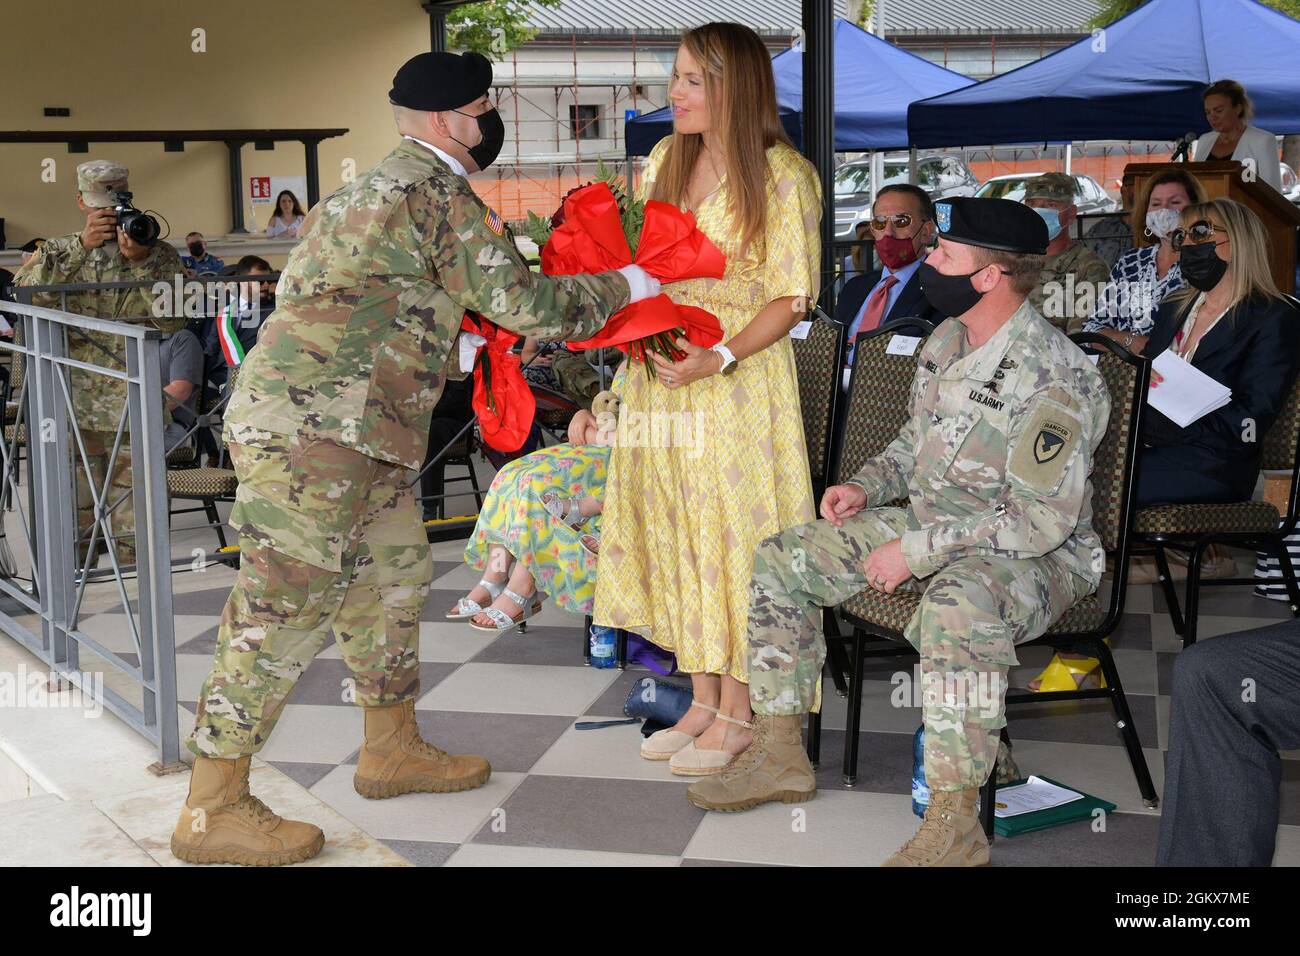 Mrs. Amanda Vogel, wife to Col. Daniel J. Vogel, outgoing commander of U.S. Army Garrison Italy, is awarded red flowers during change of command ceremony under Covid-19 prevention condition at Caserma Ederle, Vicenza, Italy July 16, 2021. Stock Photo